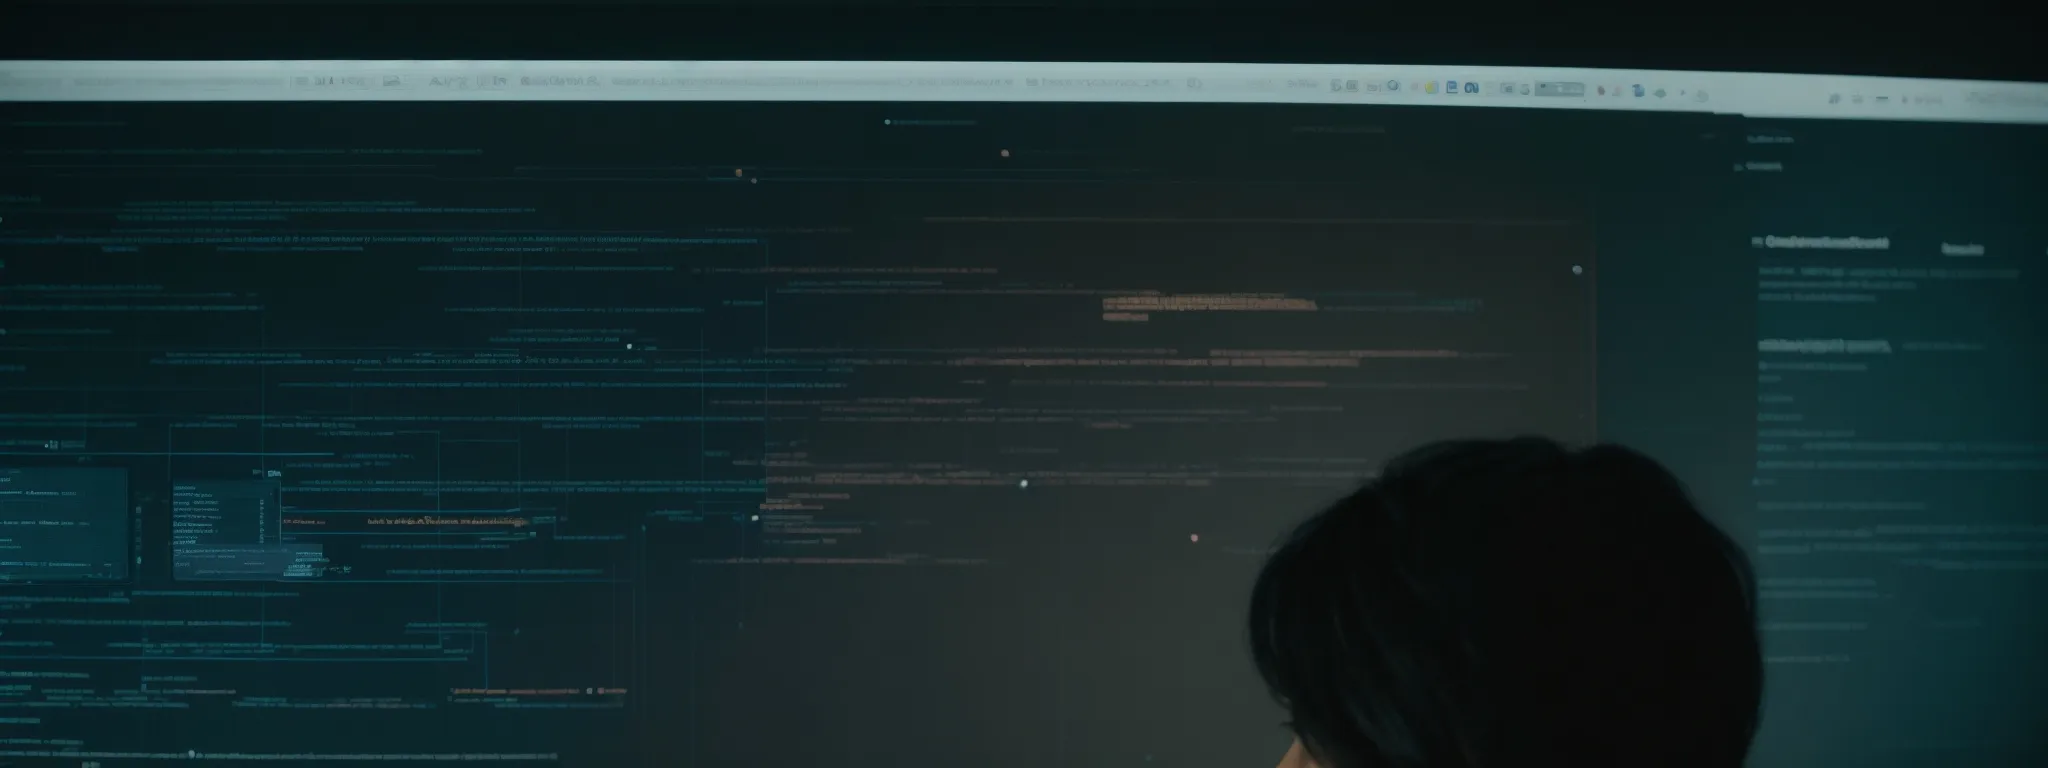 a person contemplates a layered interface on a computer screen, symbolizing the integration of an seo toolbar with browser features.